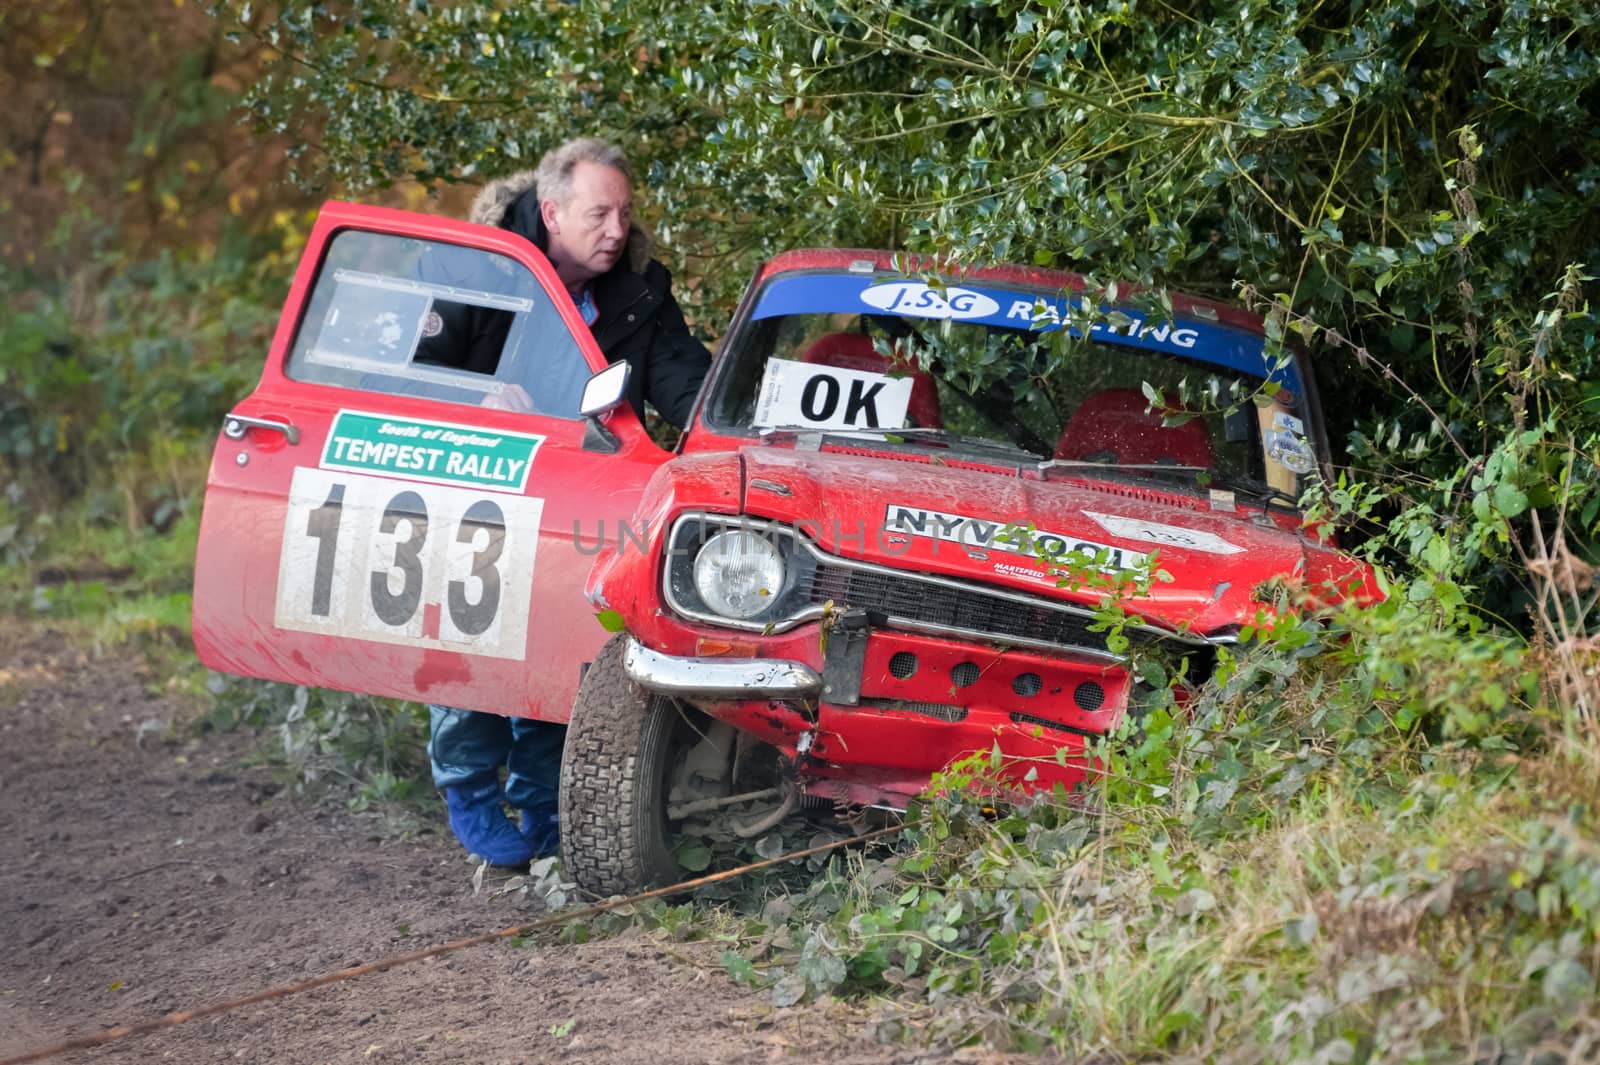 Aldershot, UK - November 3, 2012: Safety crew helping to tow a wrecked Ford Escort out of the undergrow on the Pavillion stage of the MSA Tempest Rally near Aldershot, UK